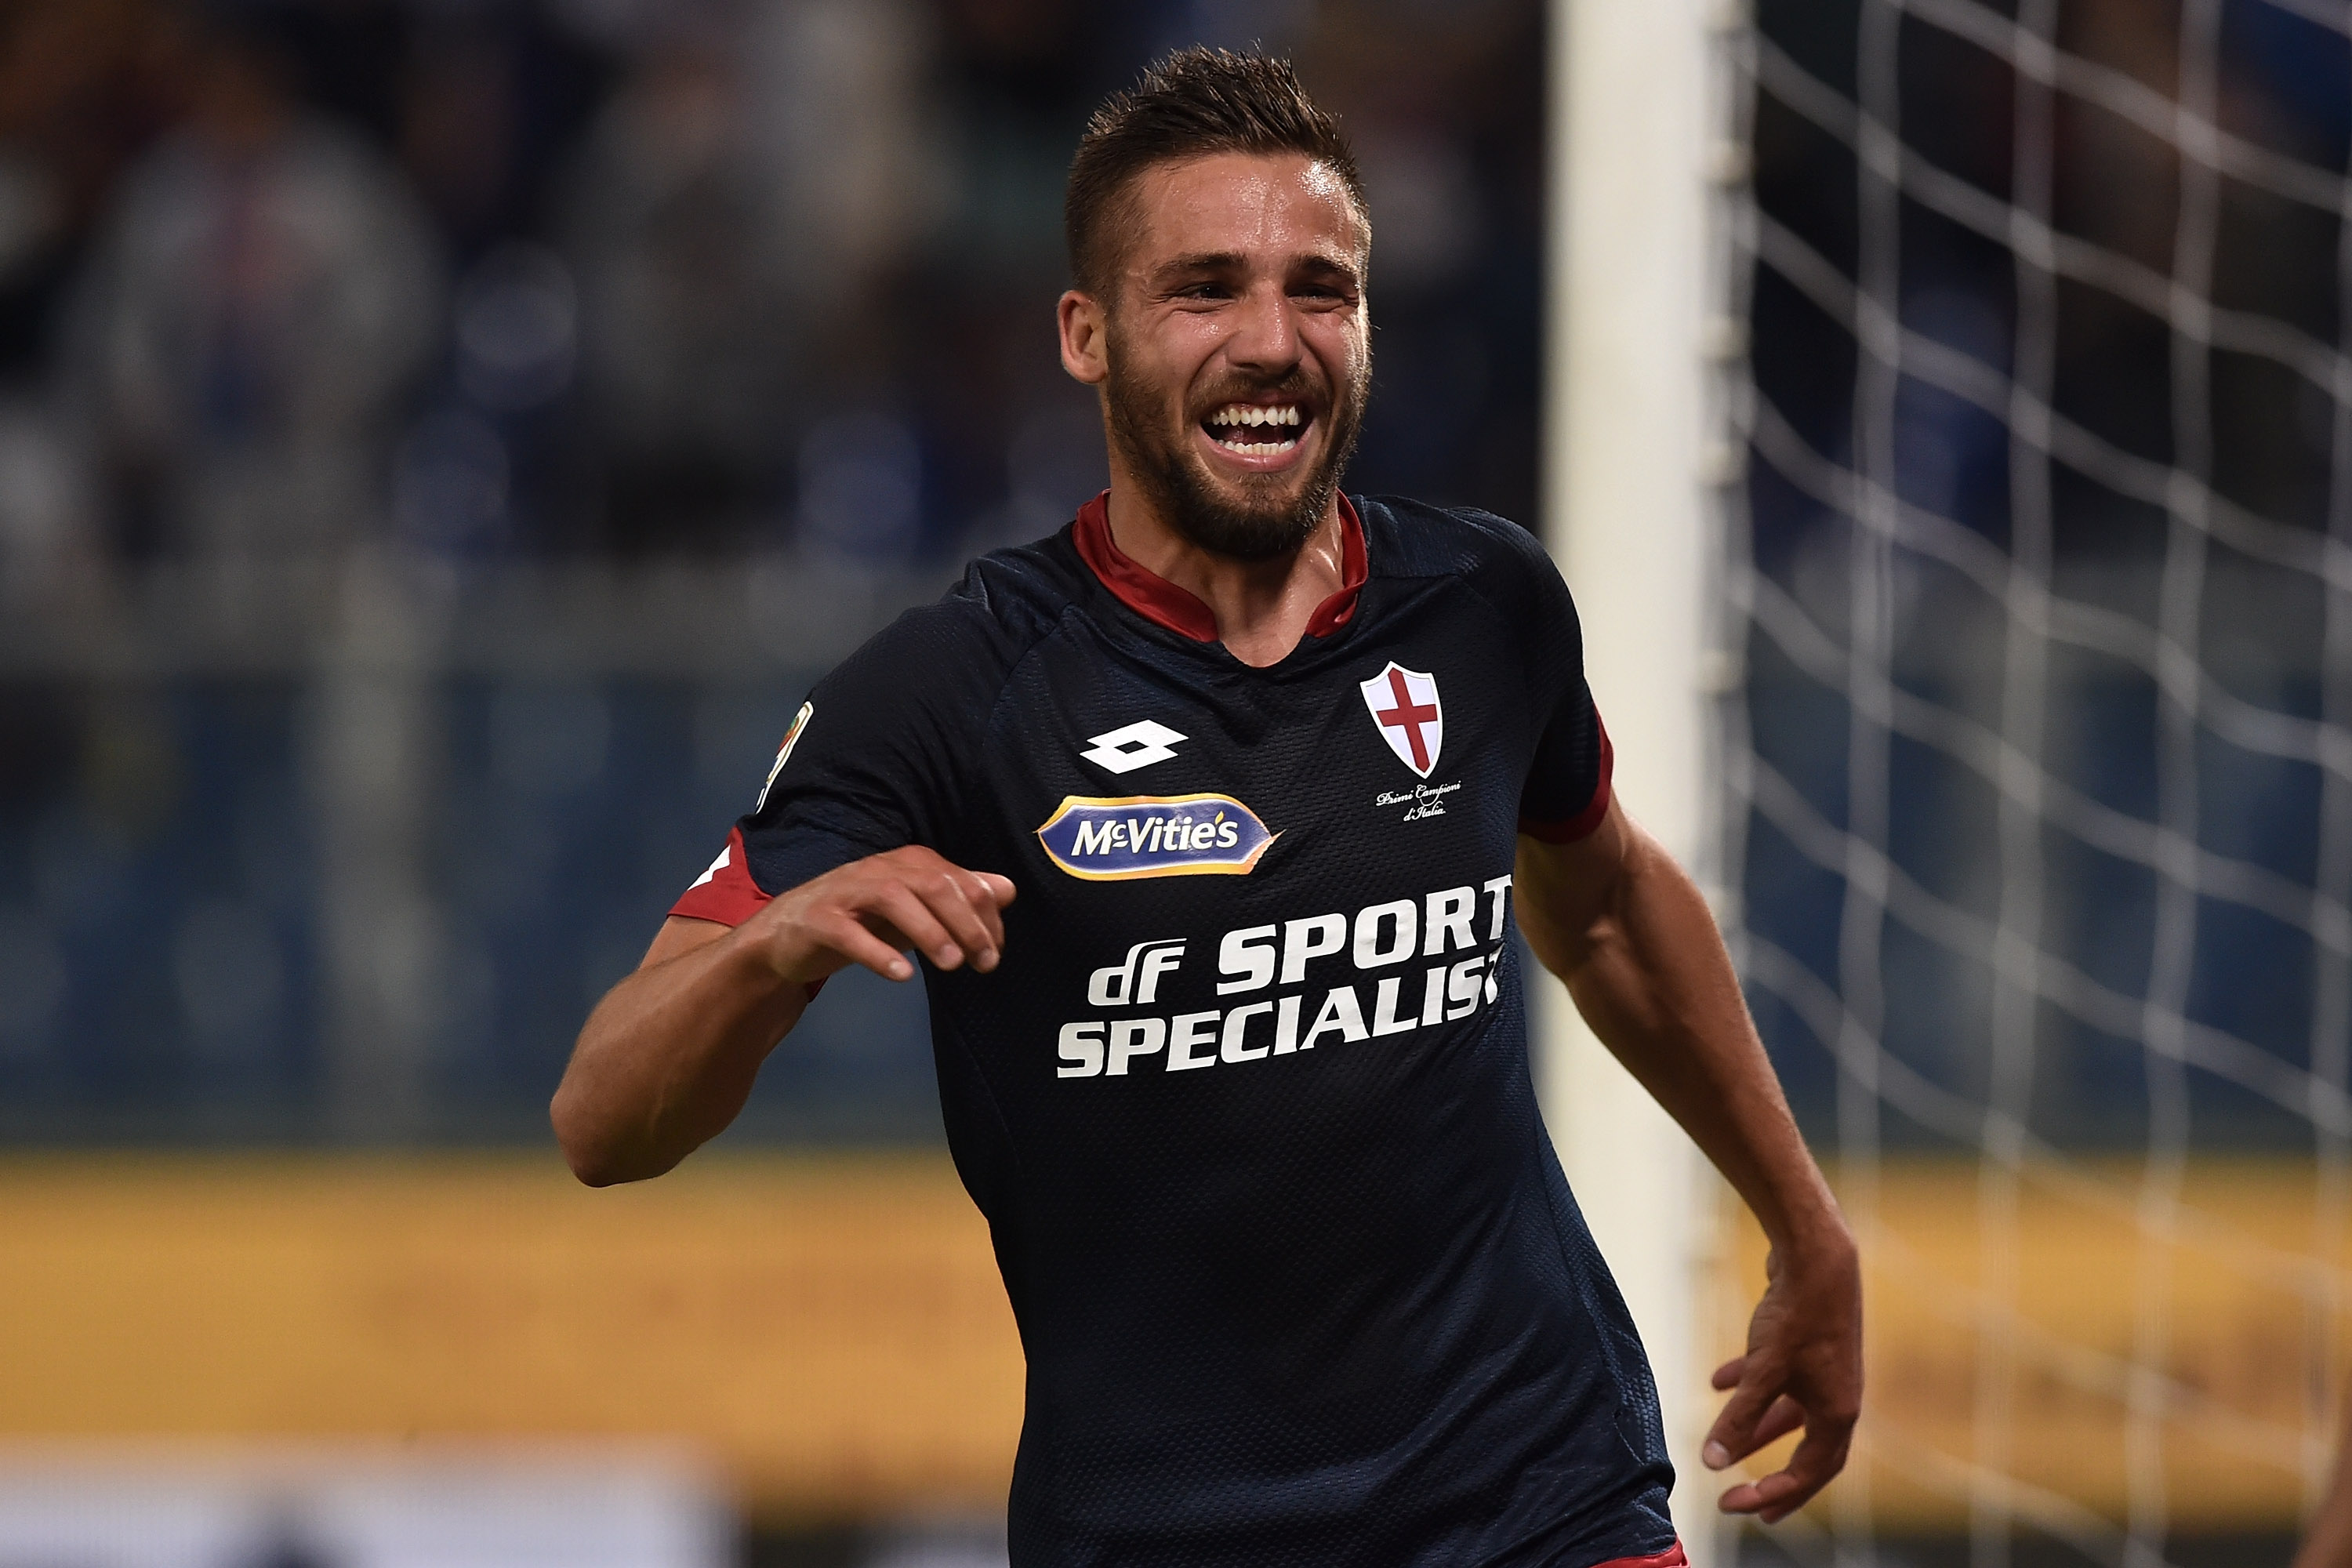 GENOA, ITALY - MAY 11:  Leonardo Pavoletti of Genoa CFC celebrates a goal during the Serie A match between Genoa CFC and Torino FC at Stadio Luigi Ferraris on May 11, 2015 in Genoa, Italy.  (Photo by Valerio Pennicino/Getty Images)